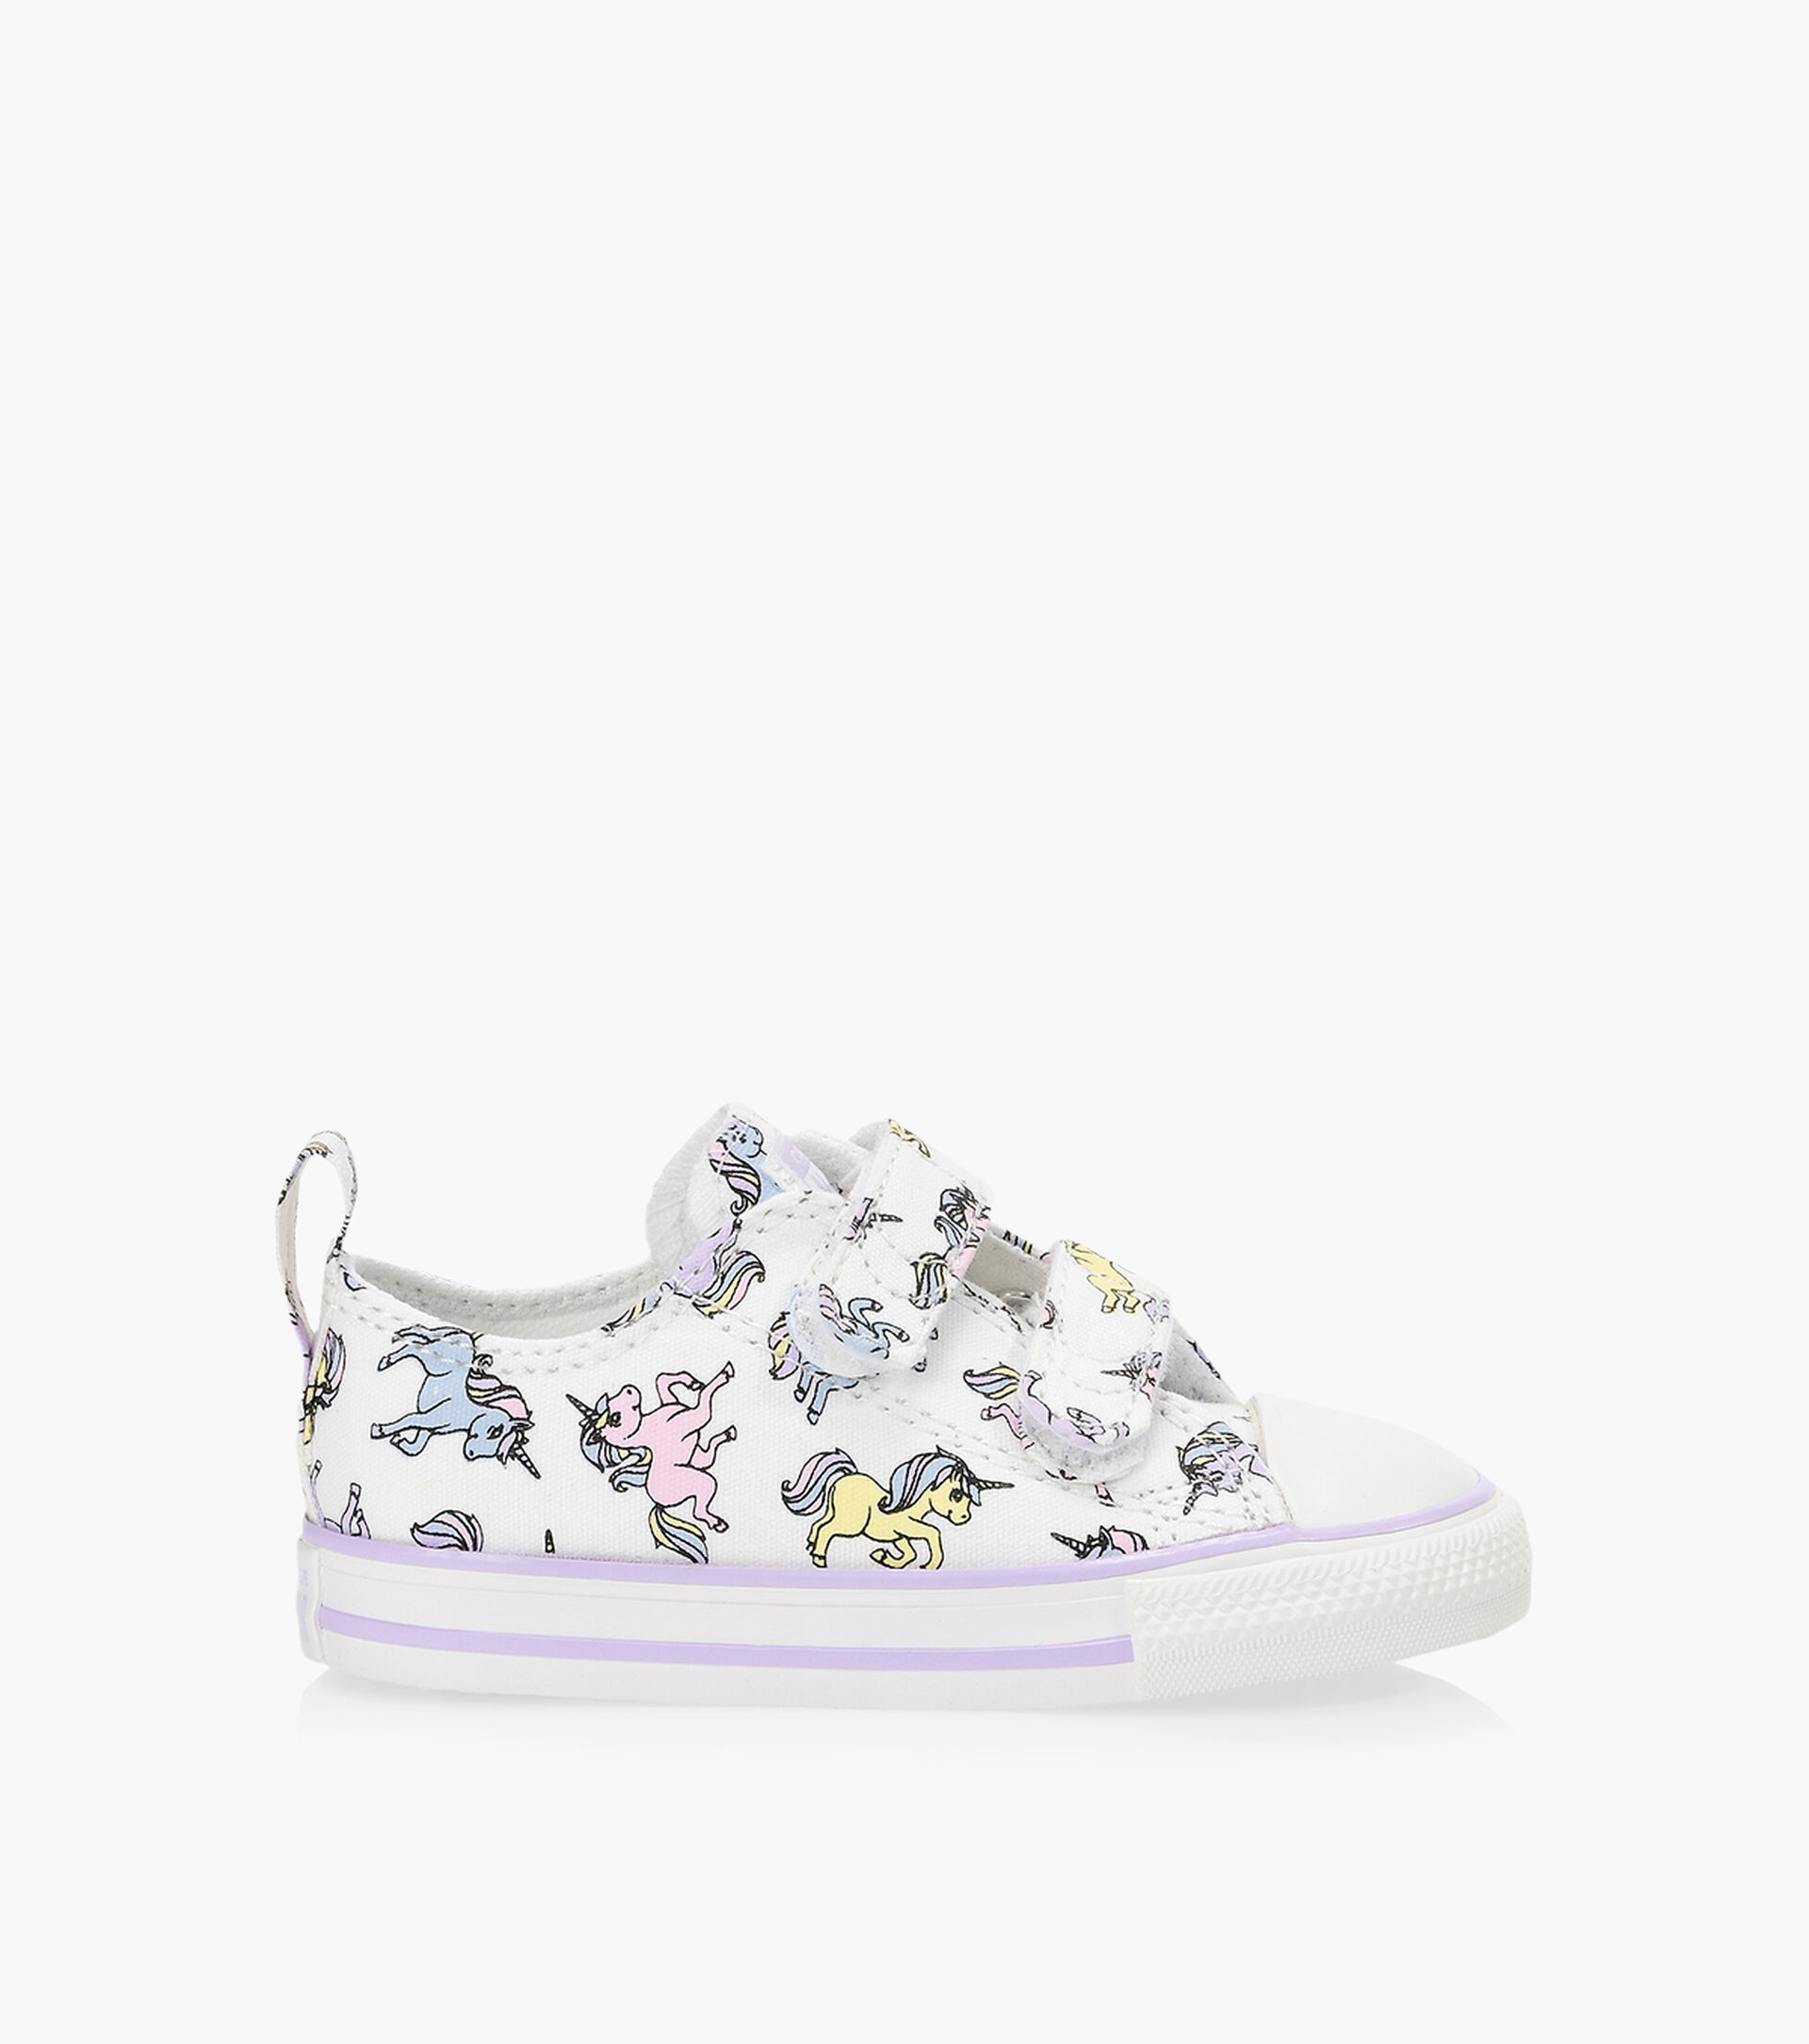 CONVERSE CHUCK TAYLOR ALL STAR 2V UNICORNS - White & Colour | Browns Shoes